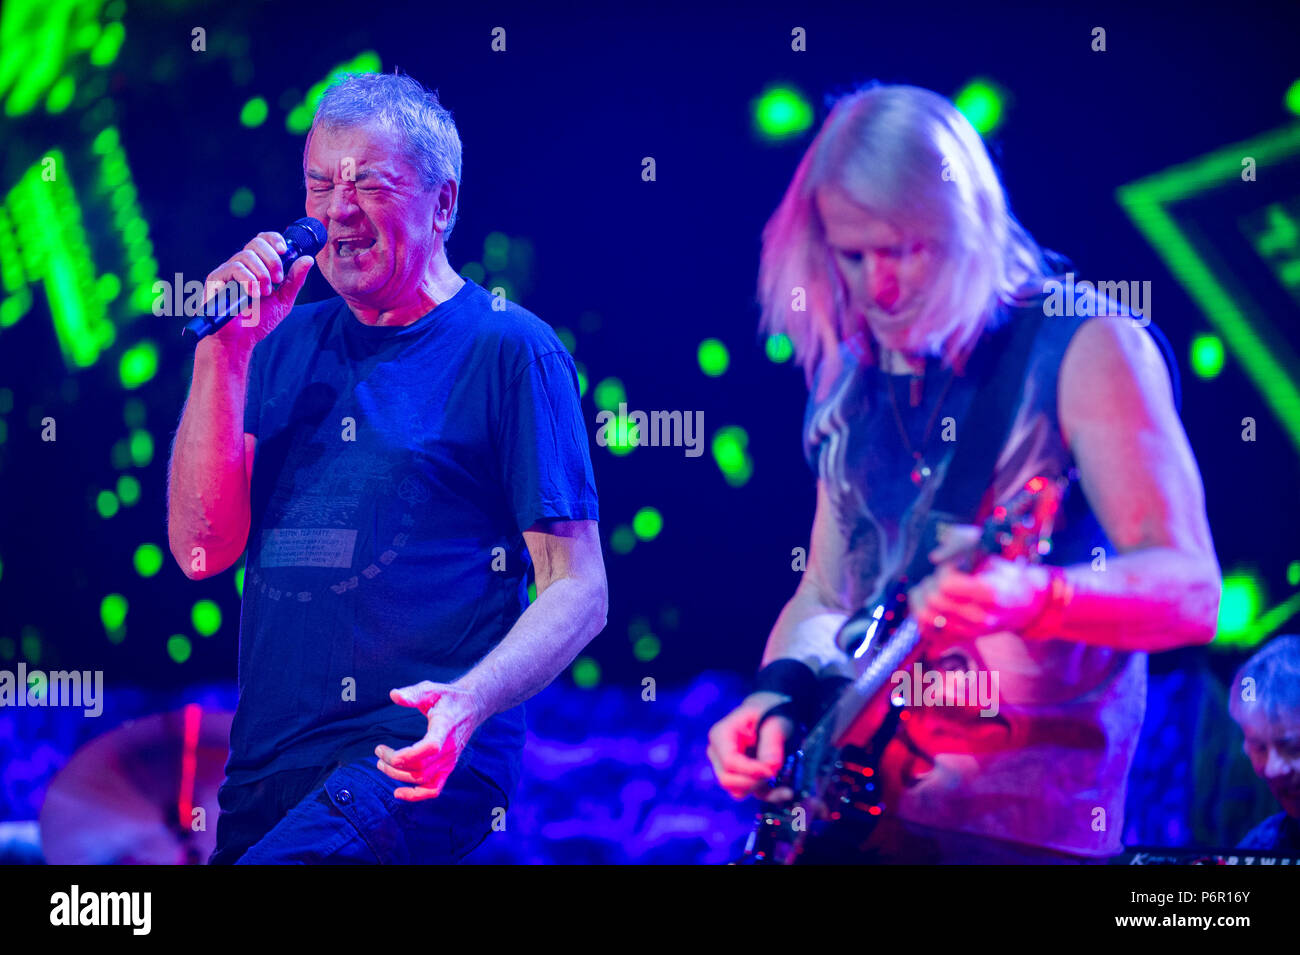 Deep Purple vocalist, Ian Gillan and Deep Purple guitar player, Steve Morse perform. Deep purple band performs at Tauron Arena Krakow as part of the farewell tour, The Long Goodbye Tour. Stock Photo